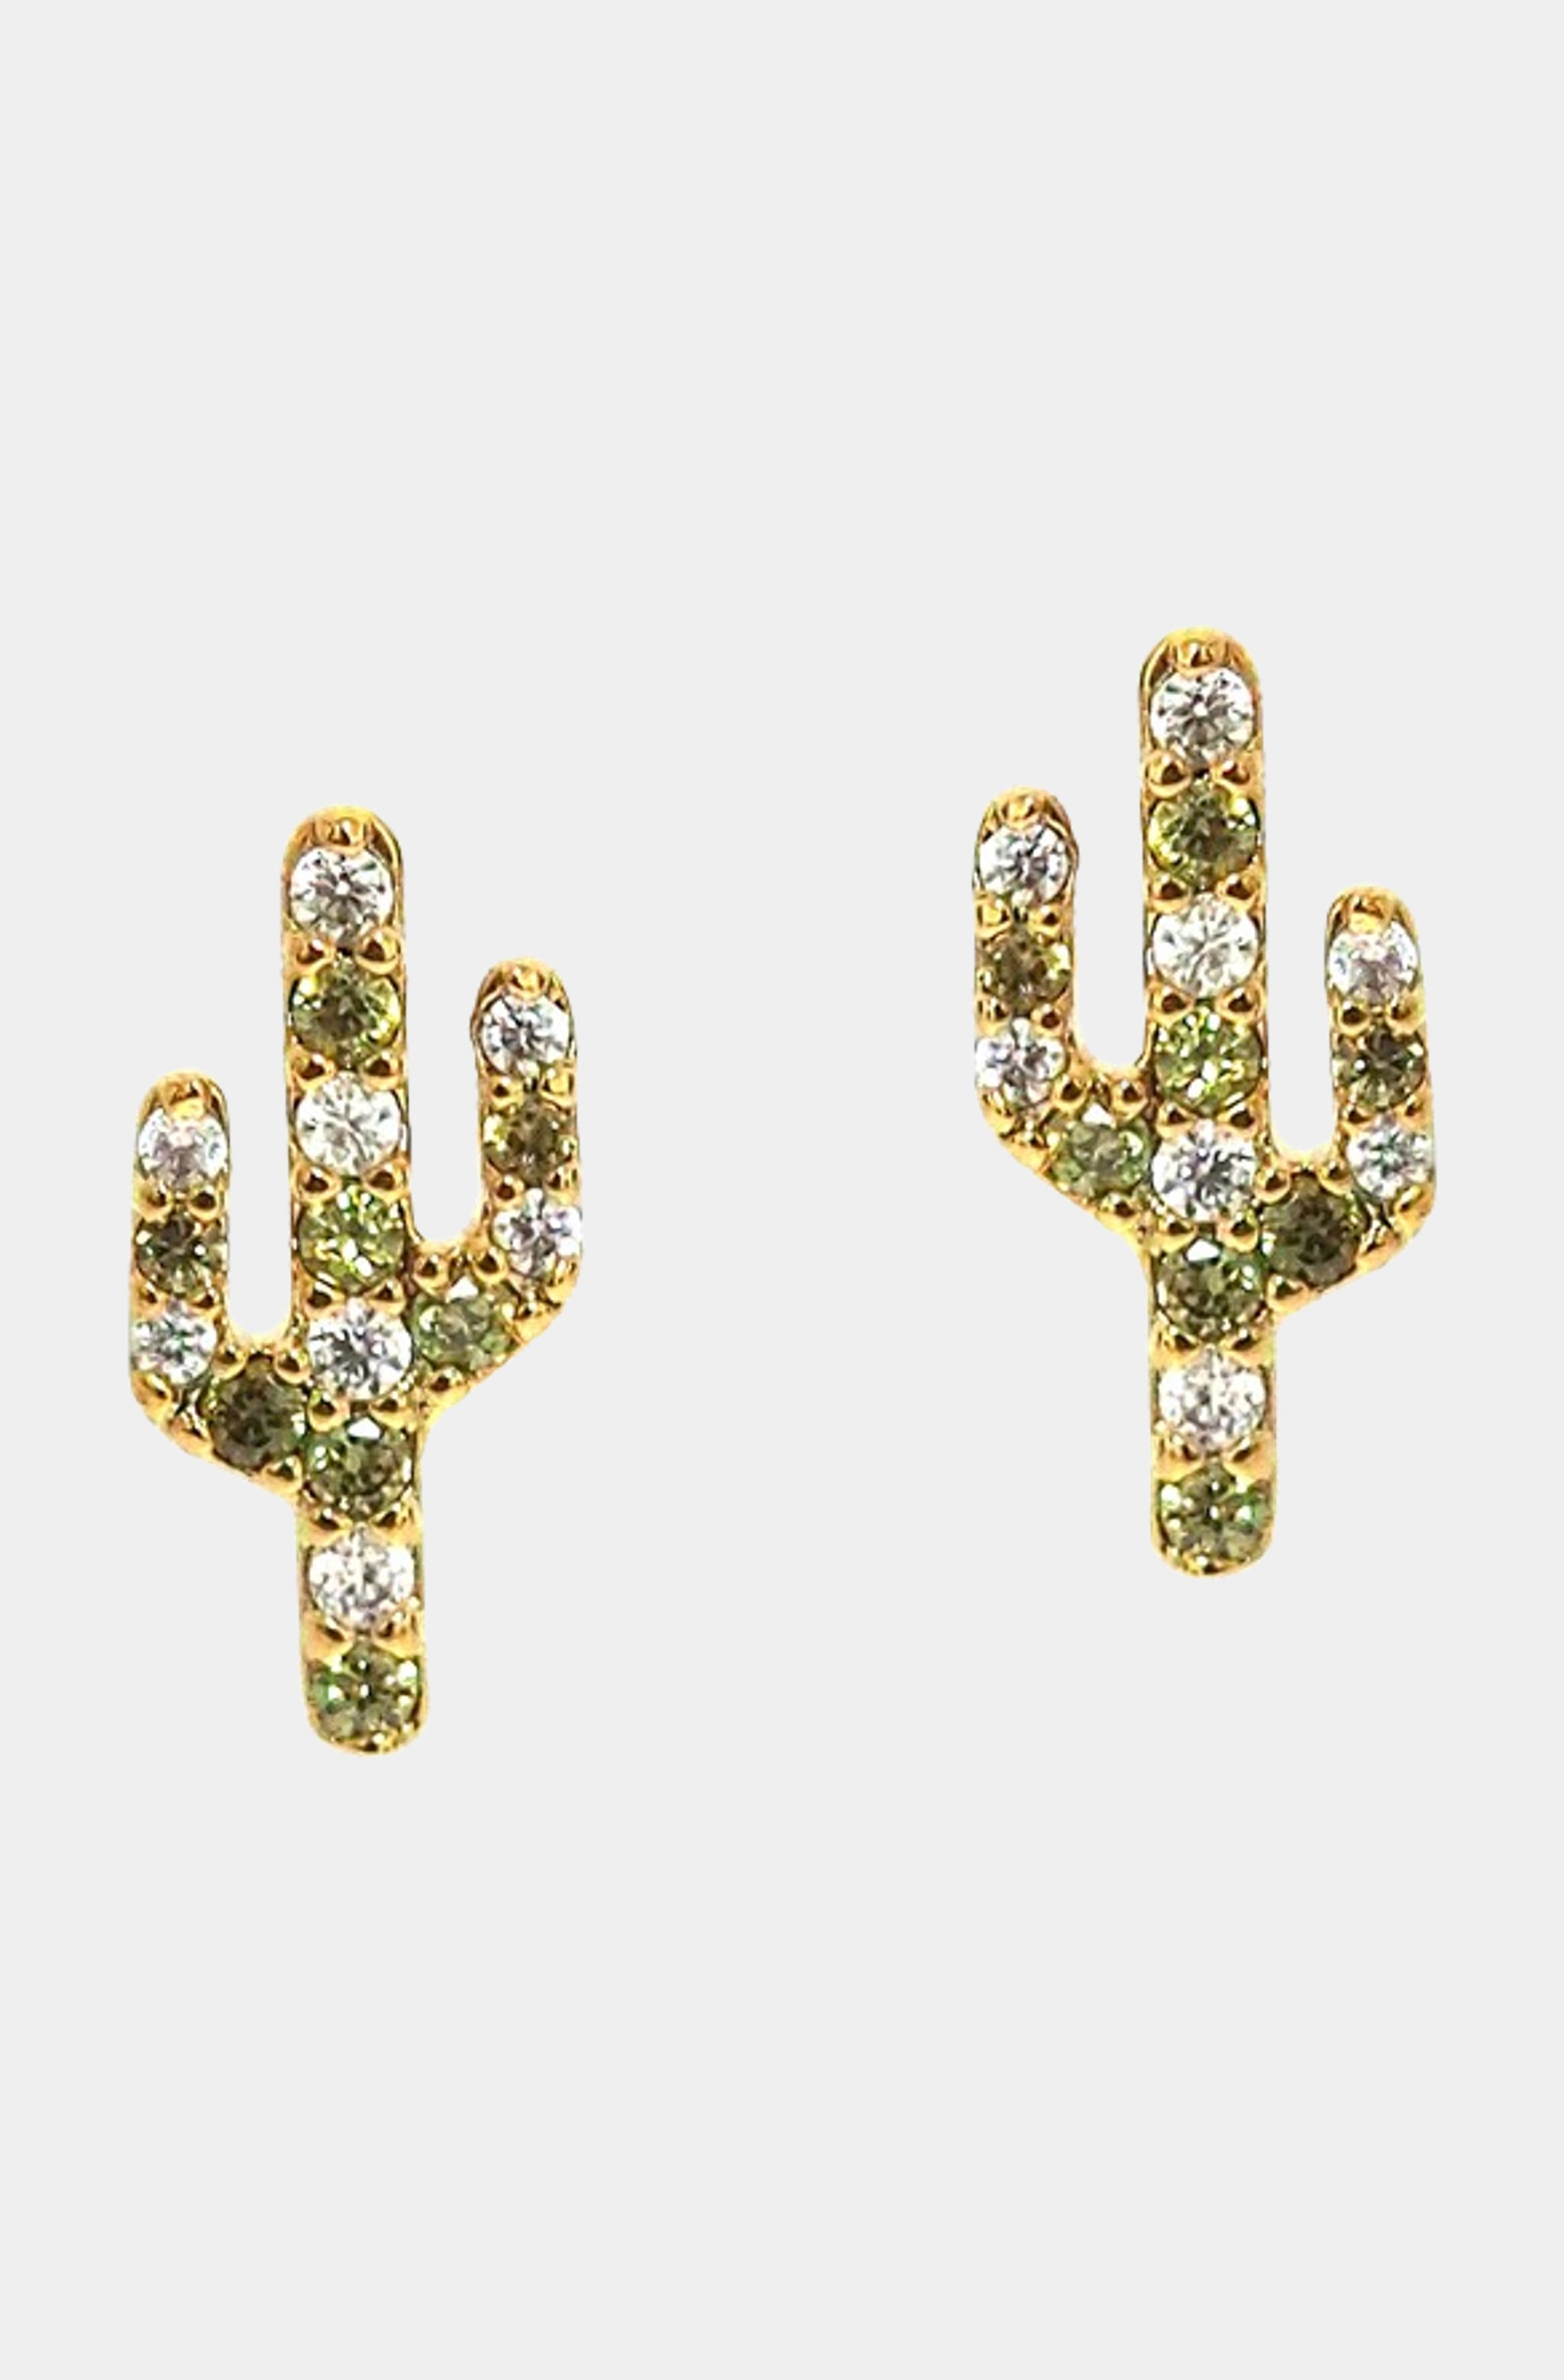 Cactus Studs with CZ and Green Stones